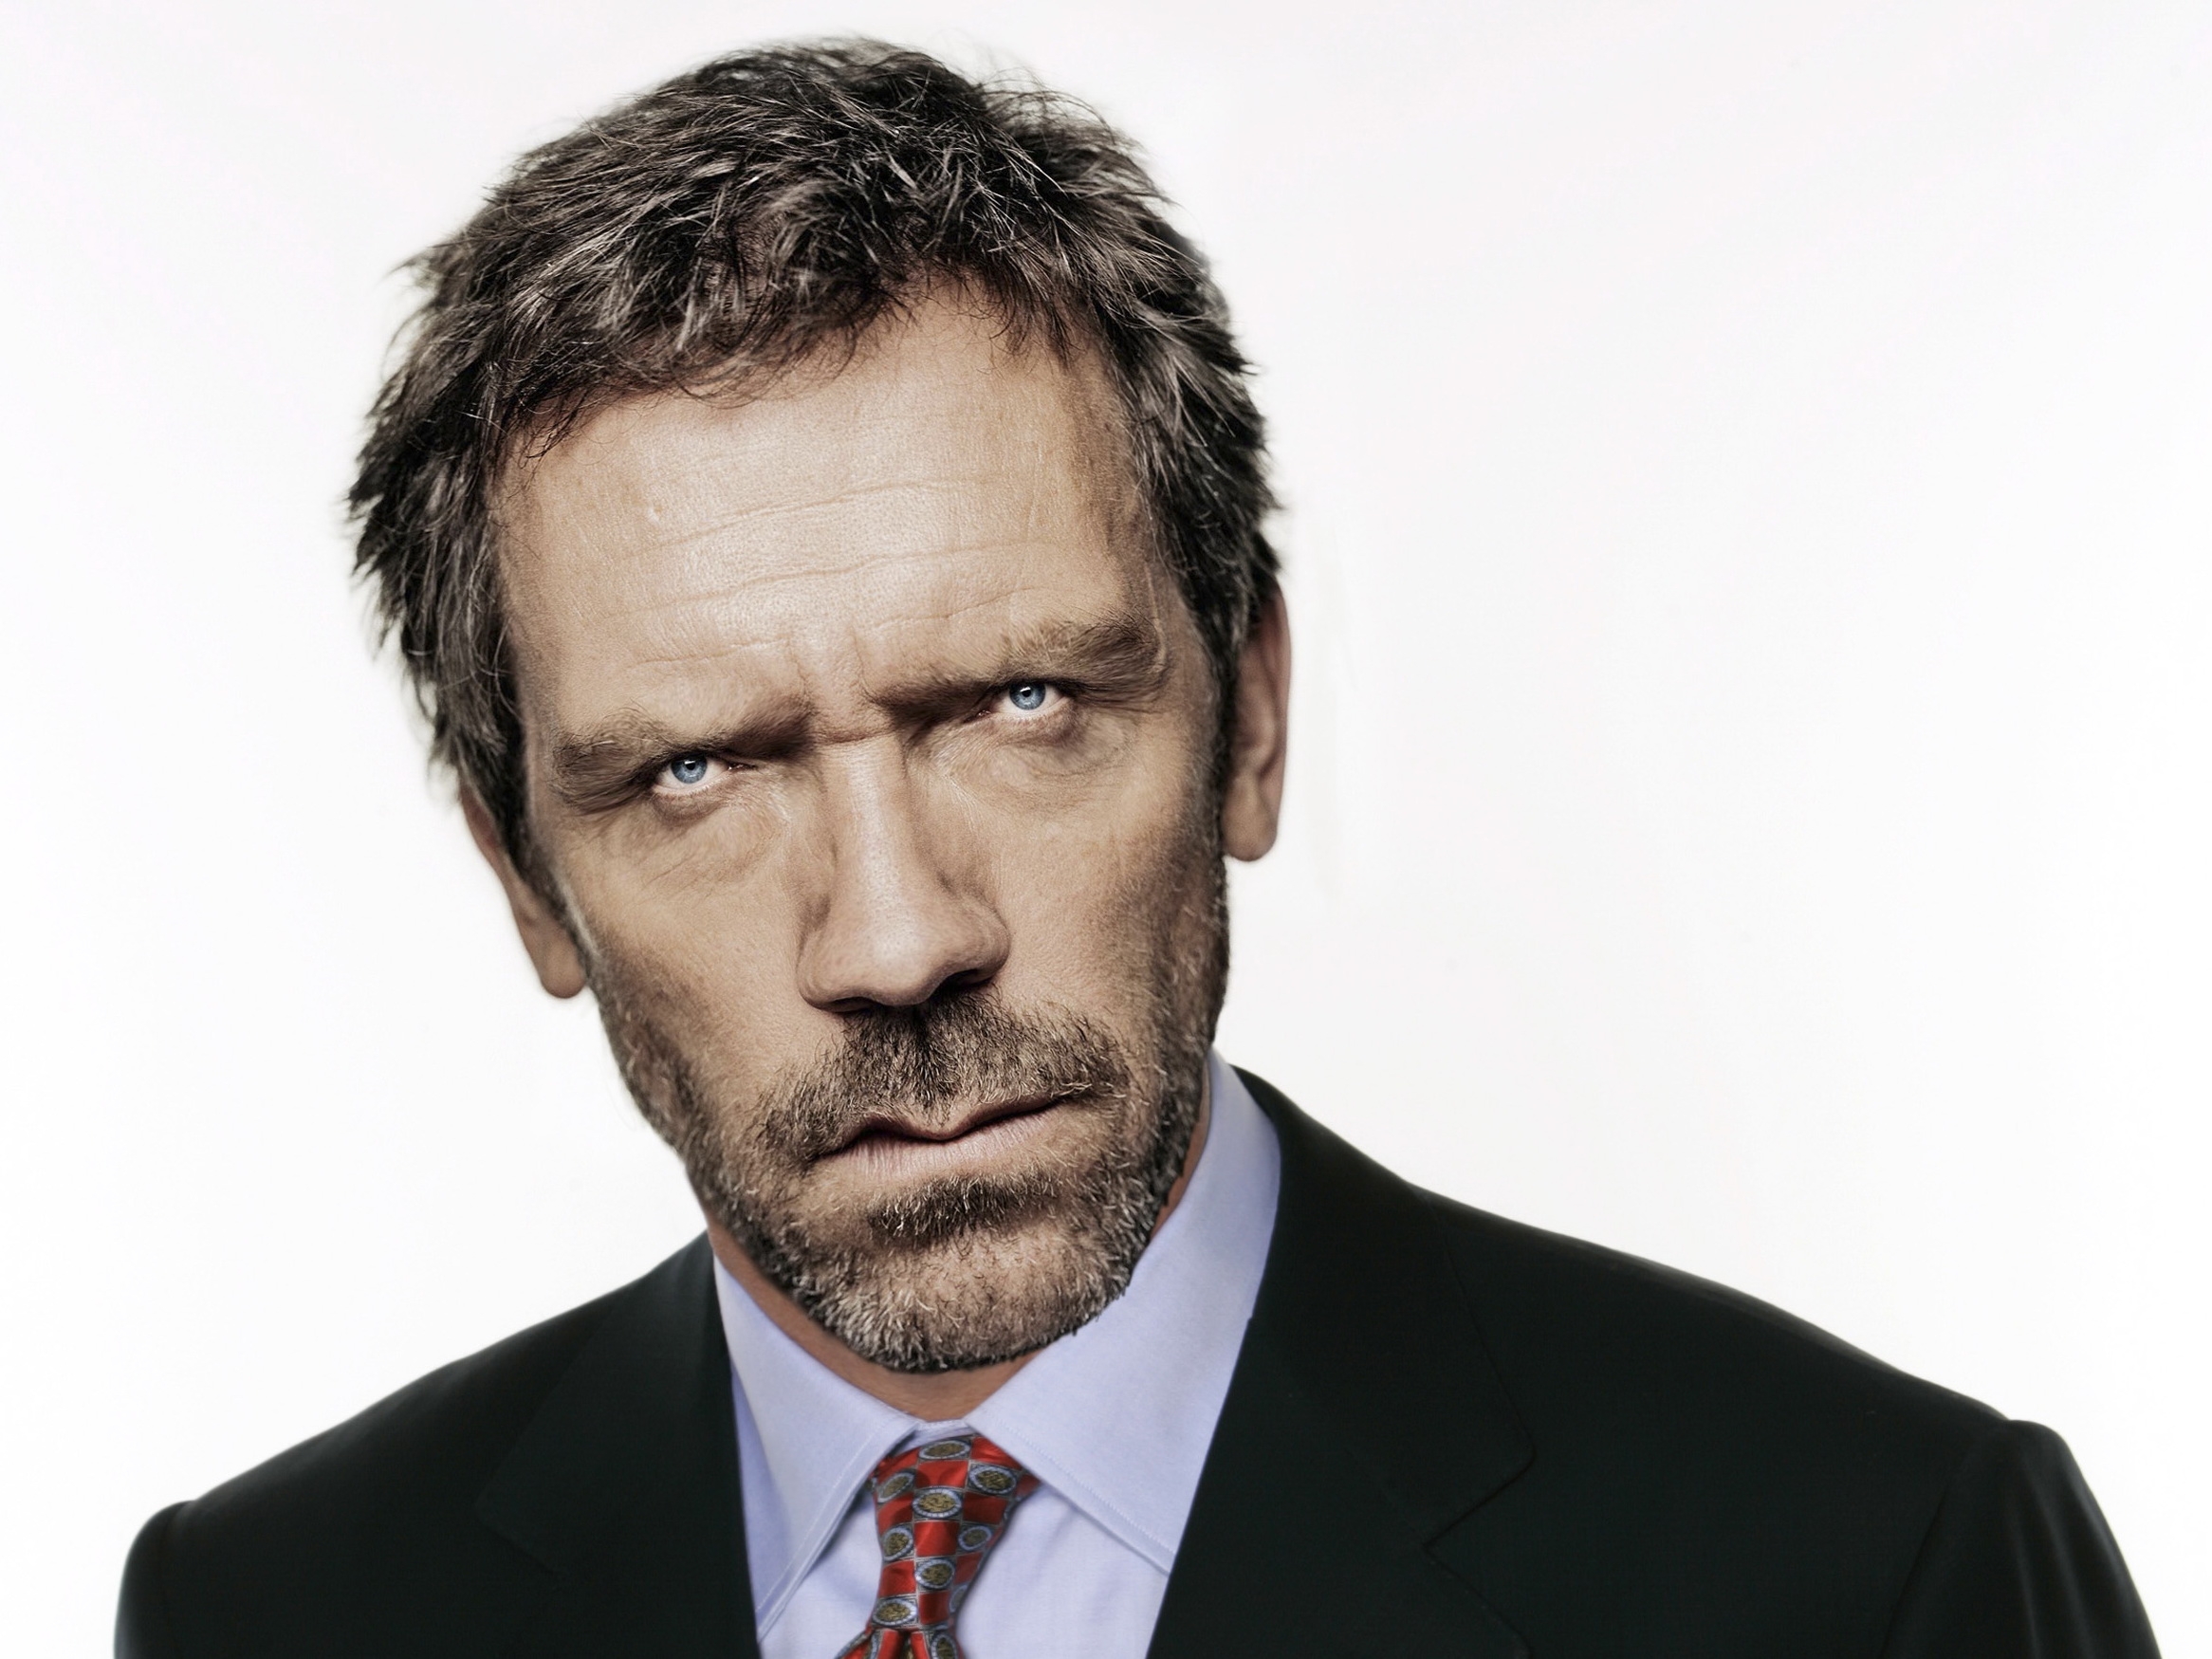 hugh laurie gregory house house md 2332x1749 wallpaper High Quality Wallpaper, High Definition Wallpaper